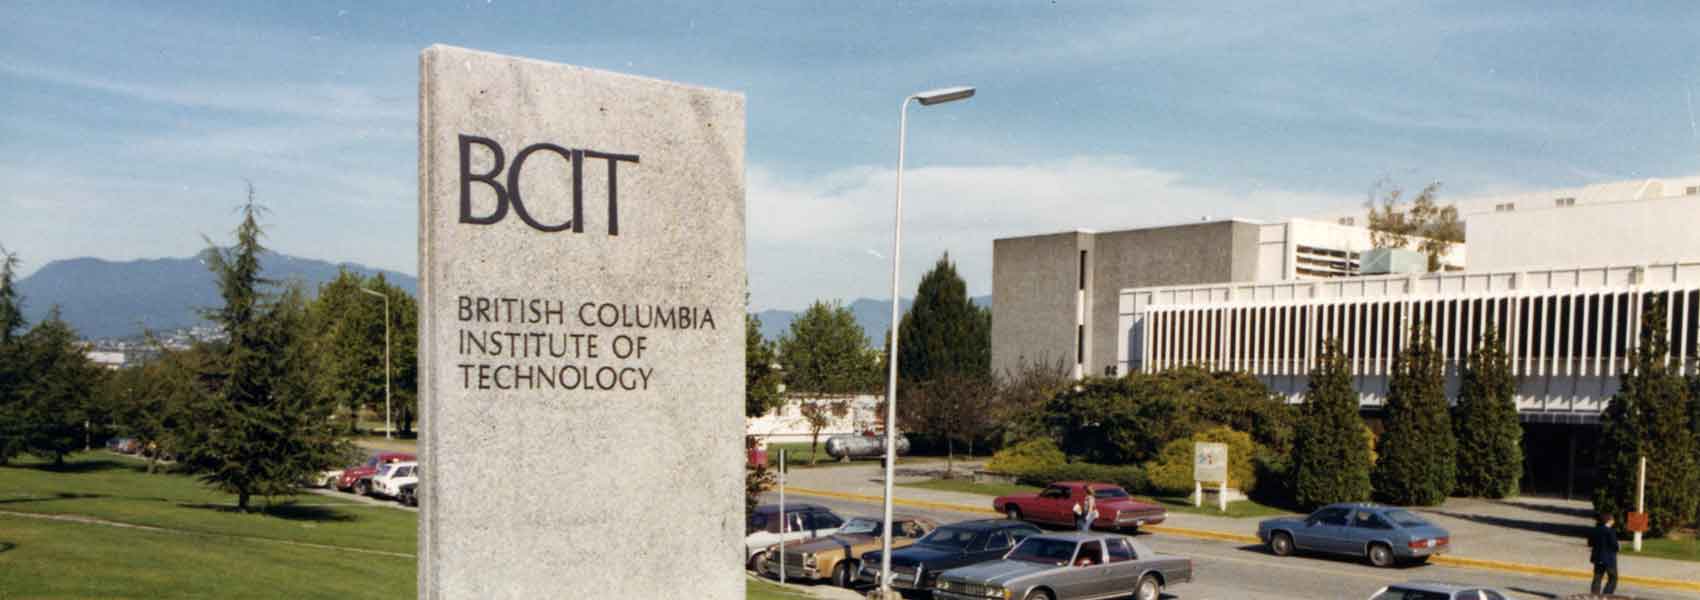 BCIT campus sign and buildings.